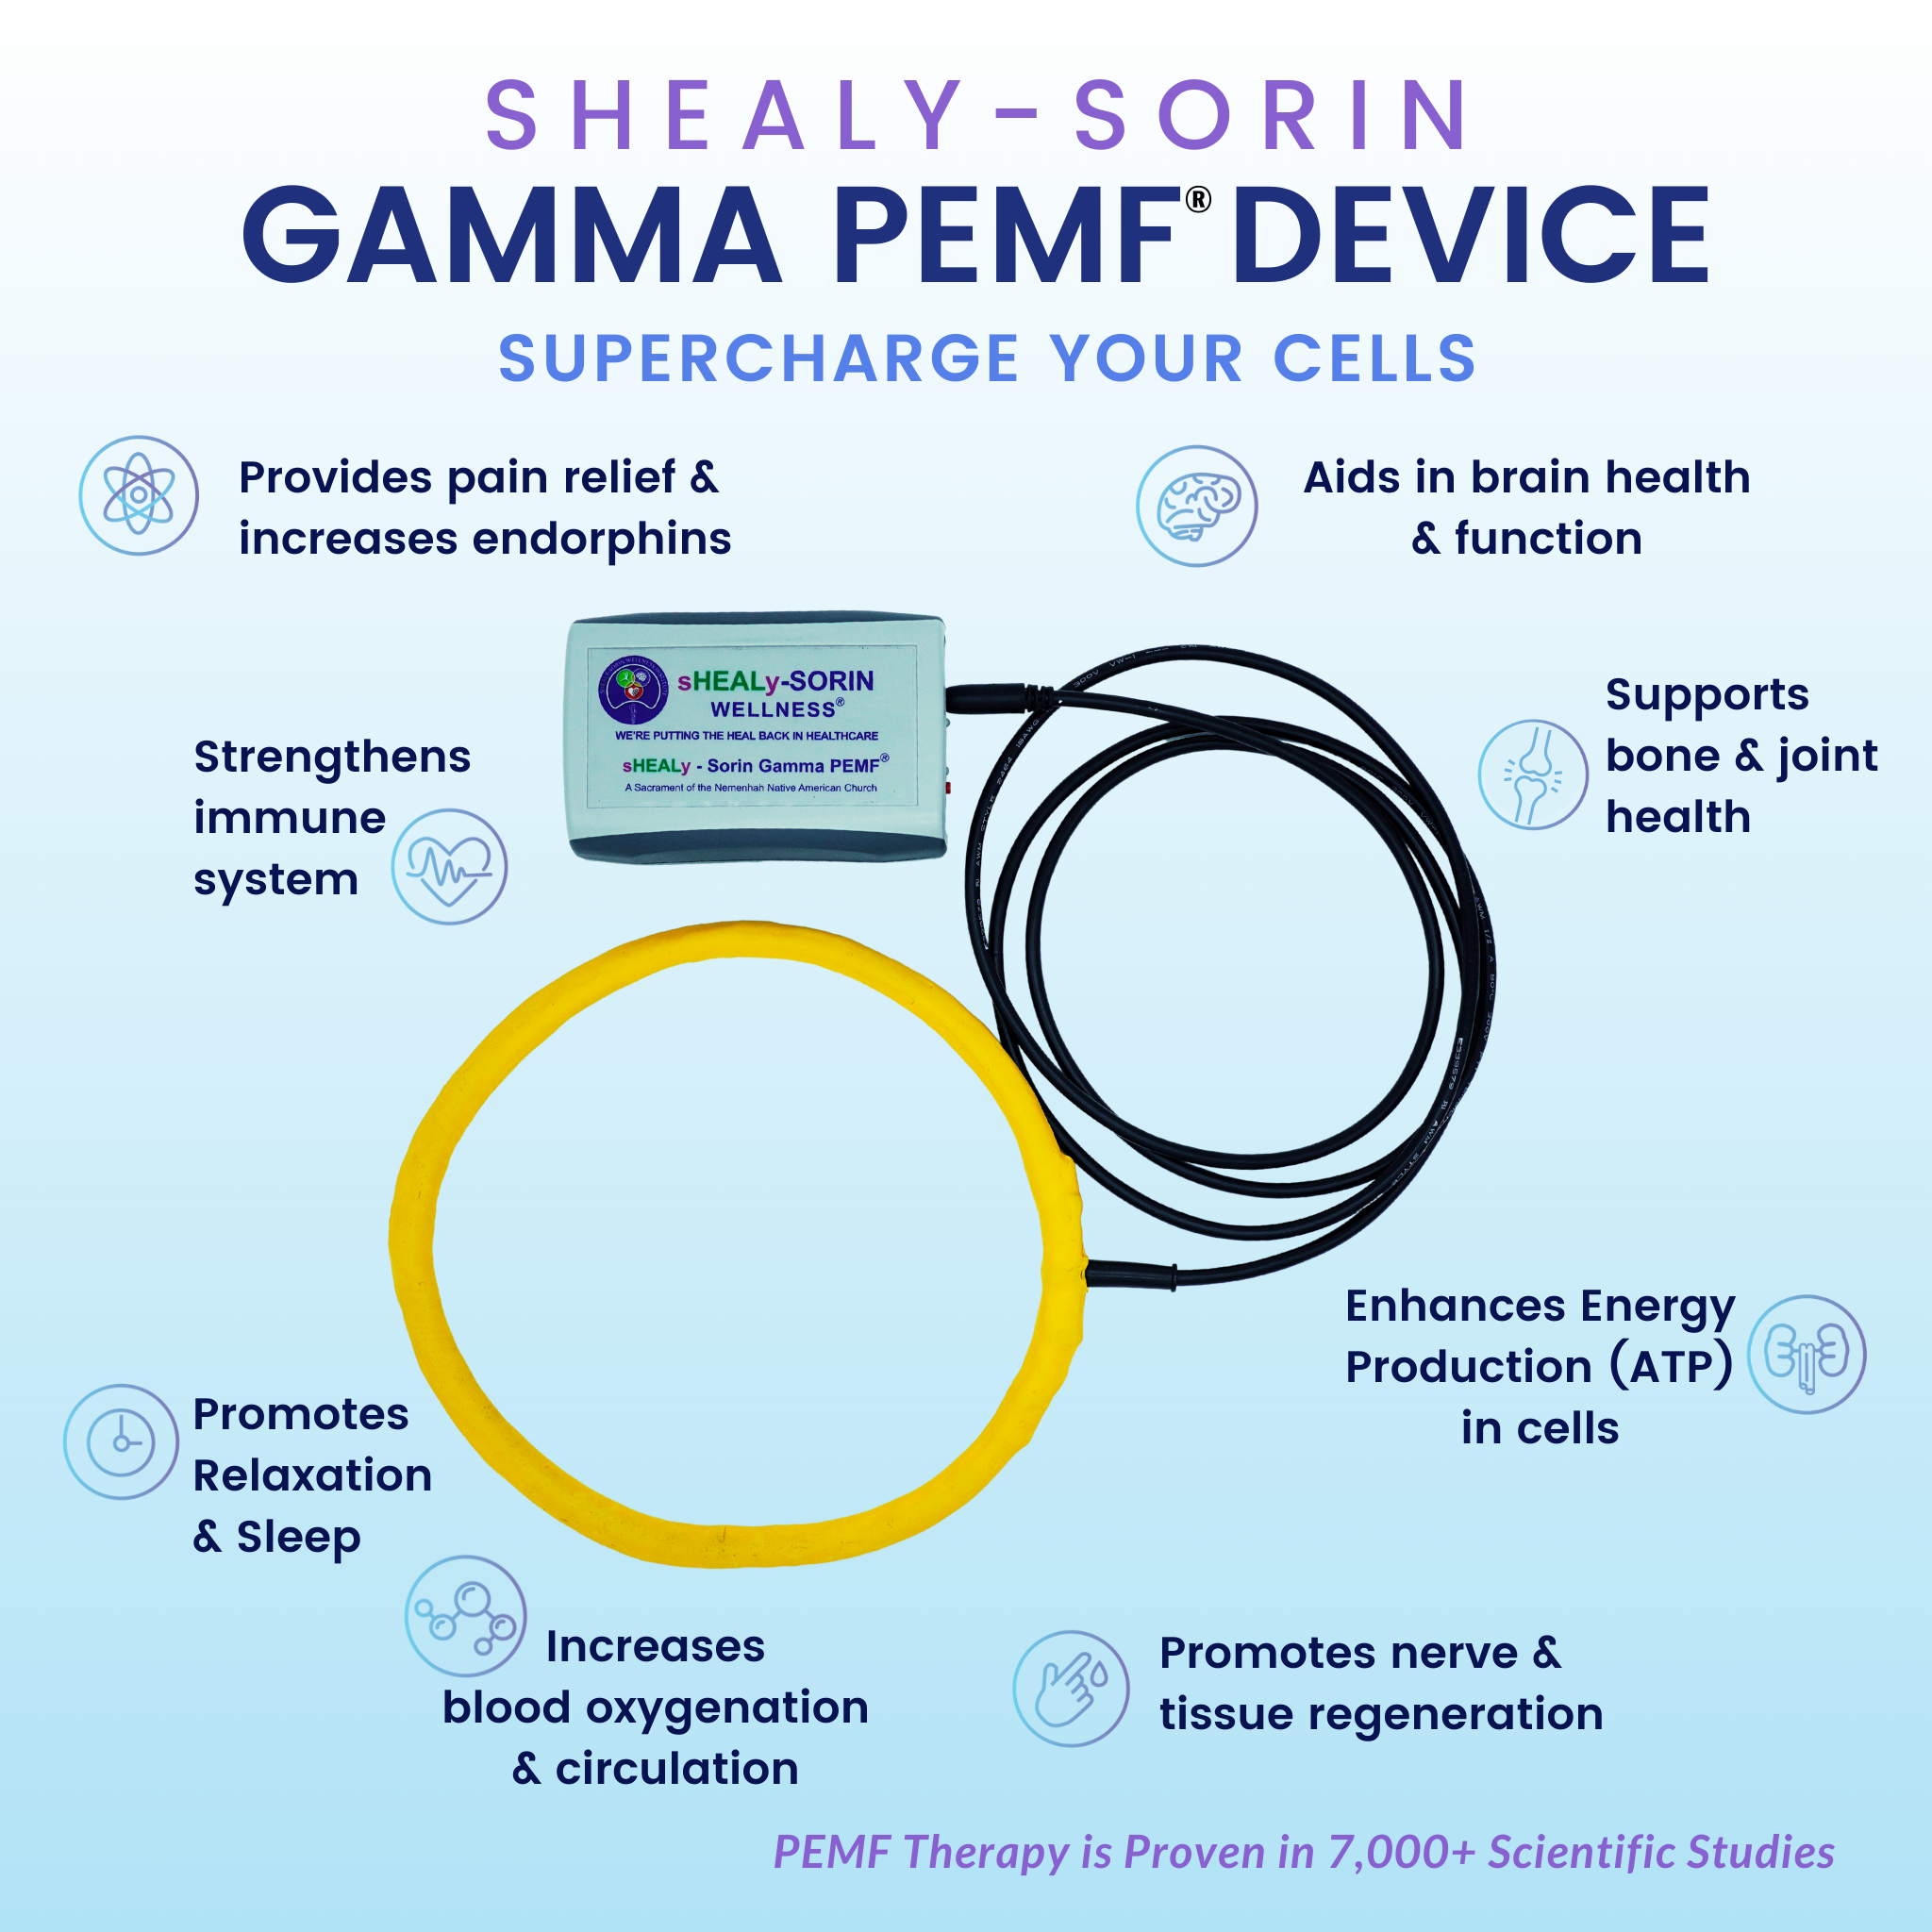 What Some Are The Benefits Of PEMF Devices For Your Health?